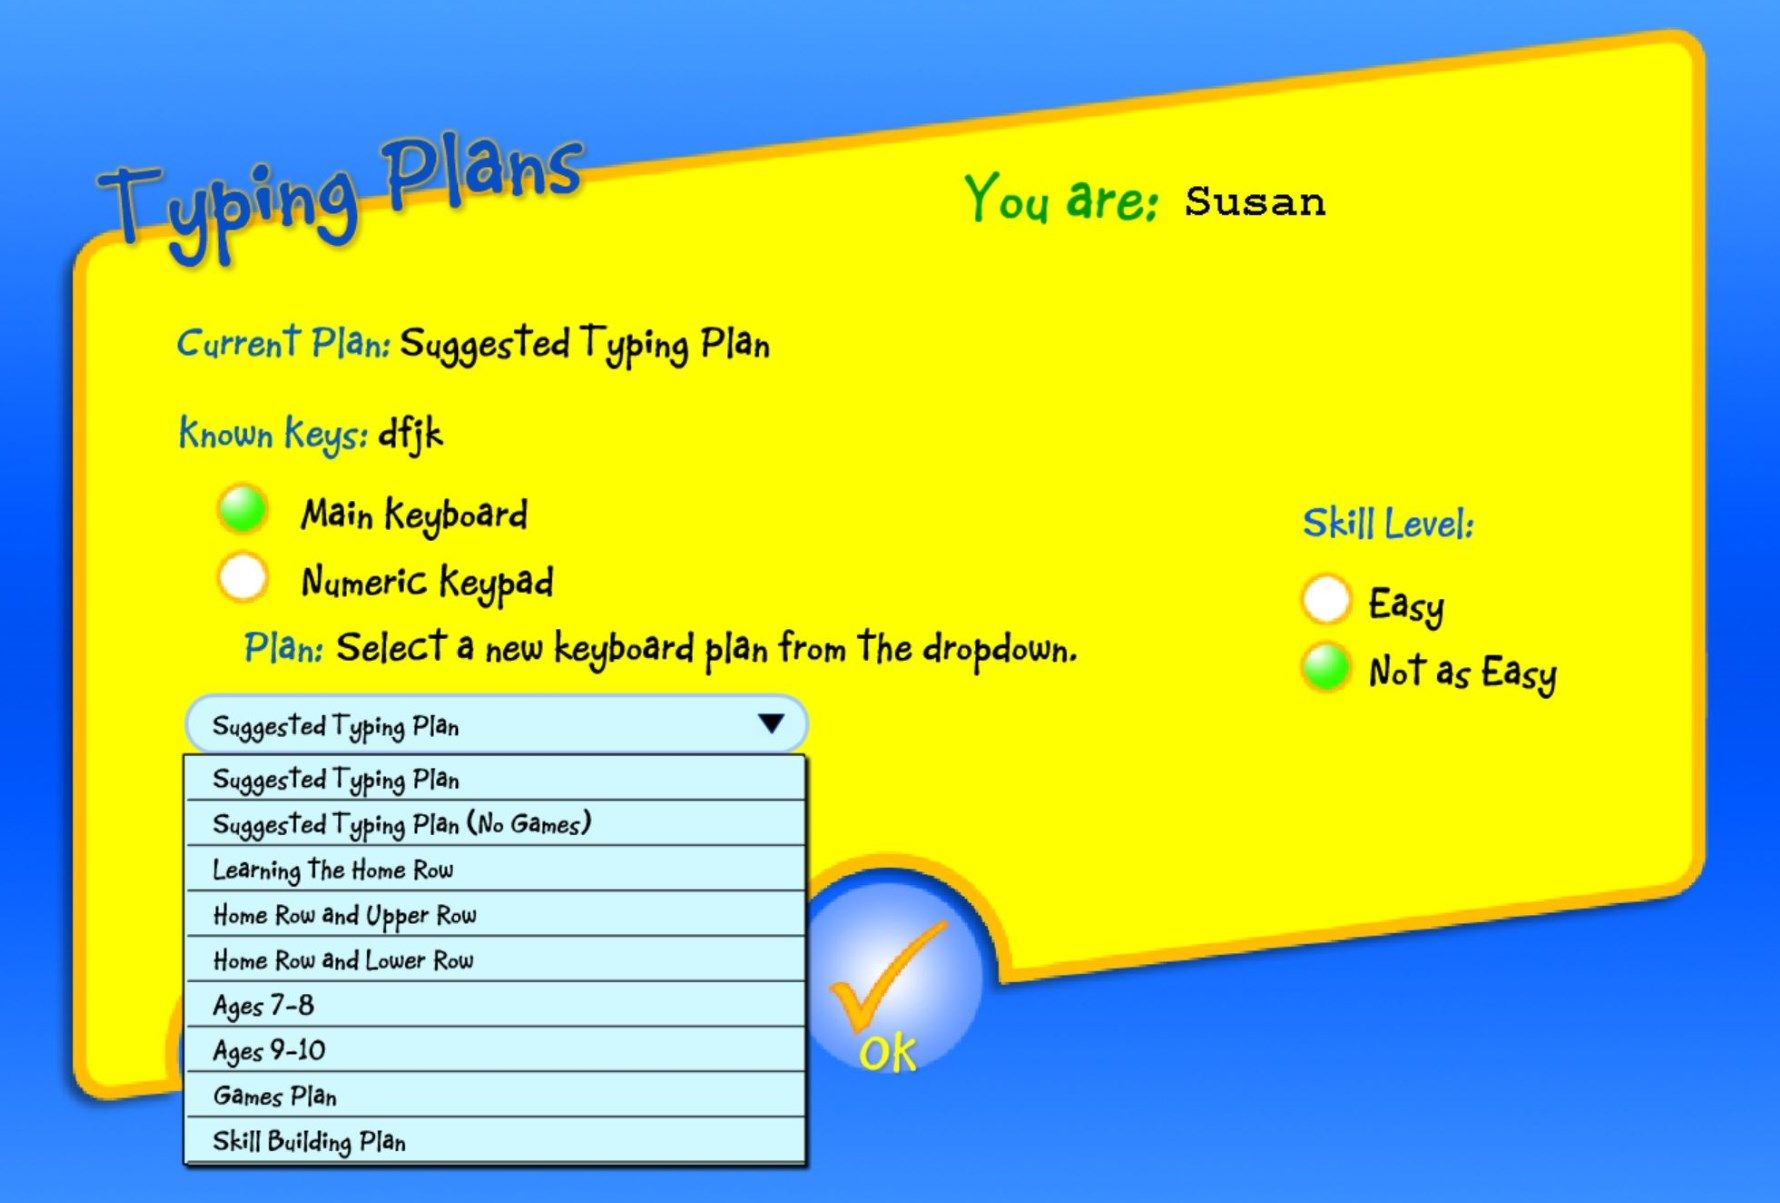 Kids can select English or Spanish and a Typing Plan that fits their skill level – there are 11 unique plans.